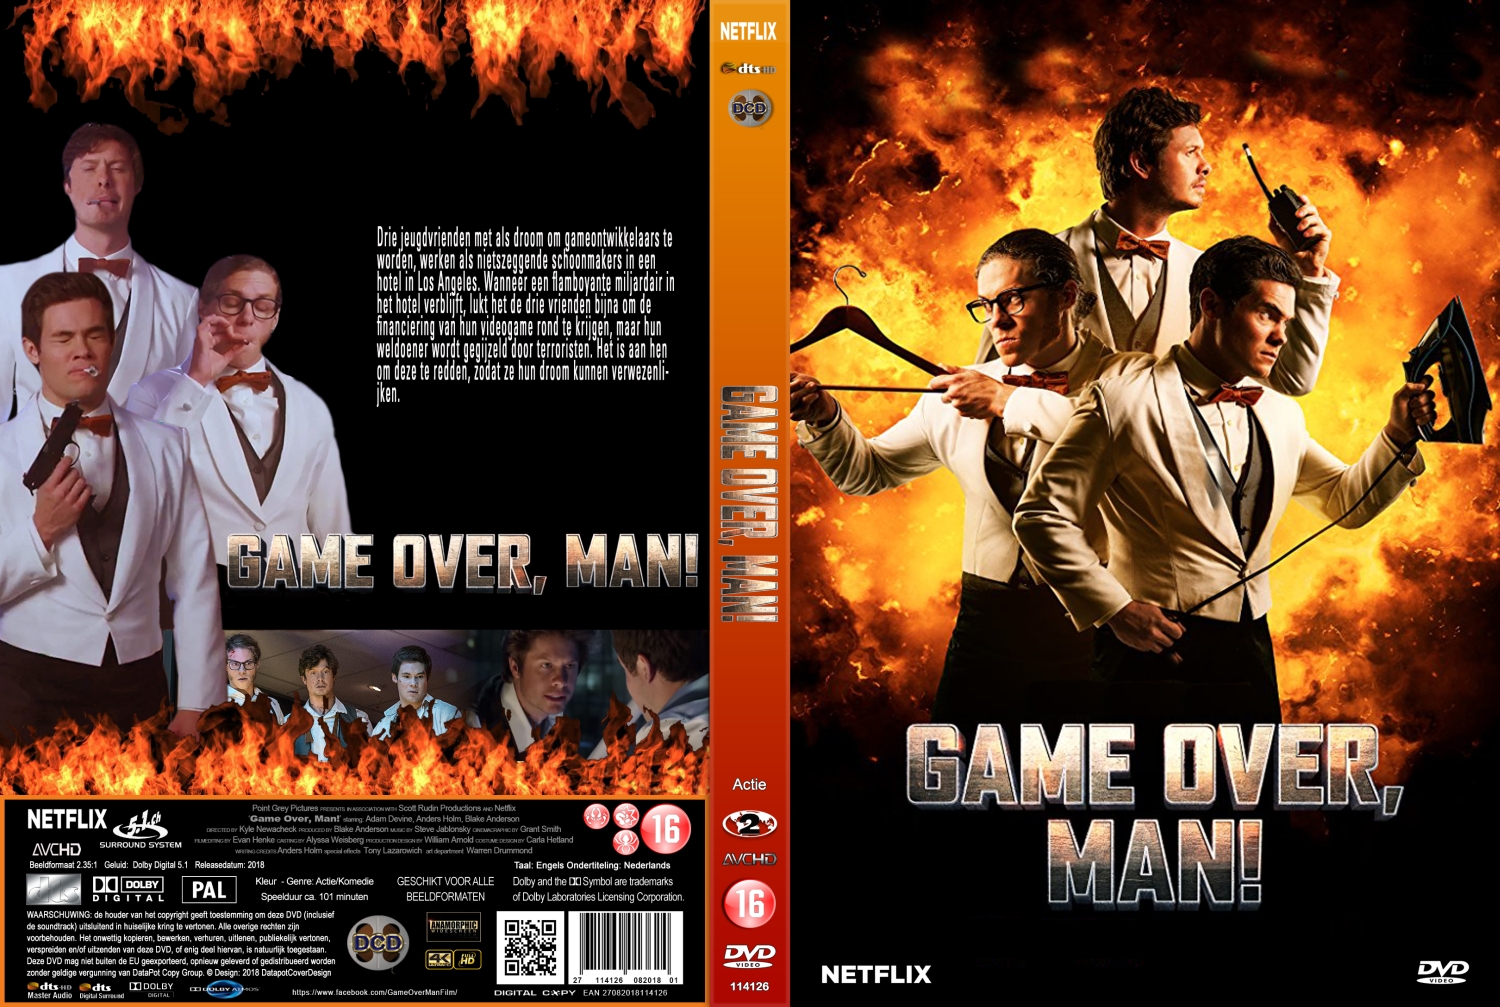 game over man (2018) DVD Cover